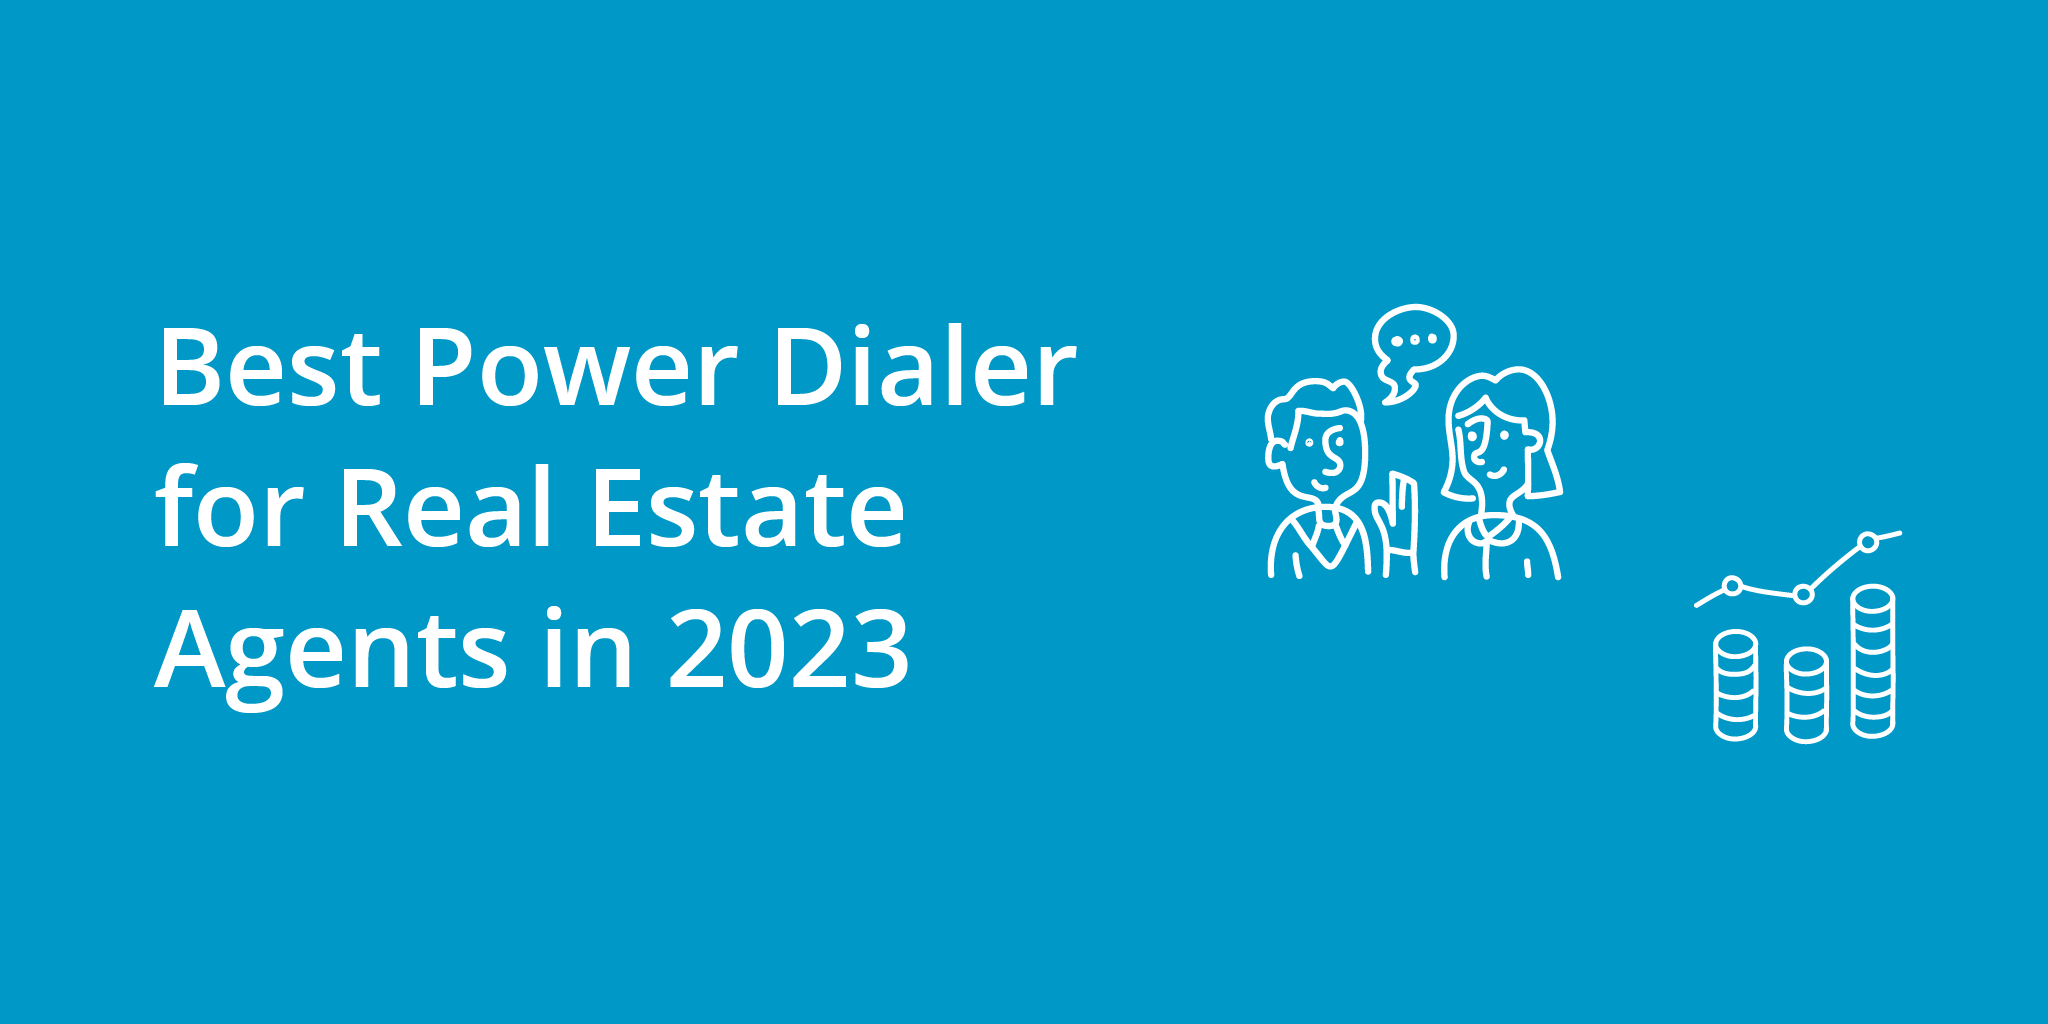 Best Power Dialer for Real Estate Agents in 2023 | Telephones for business